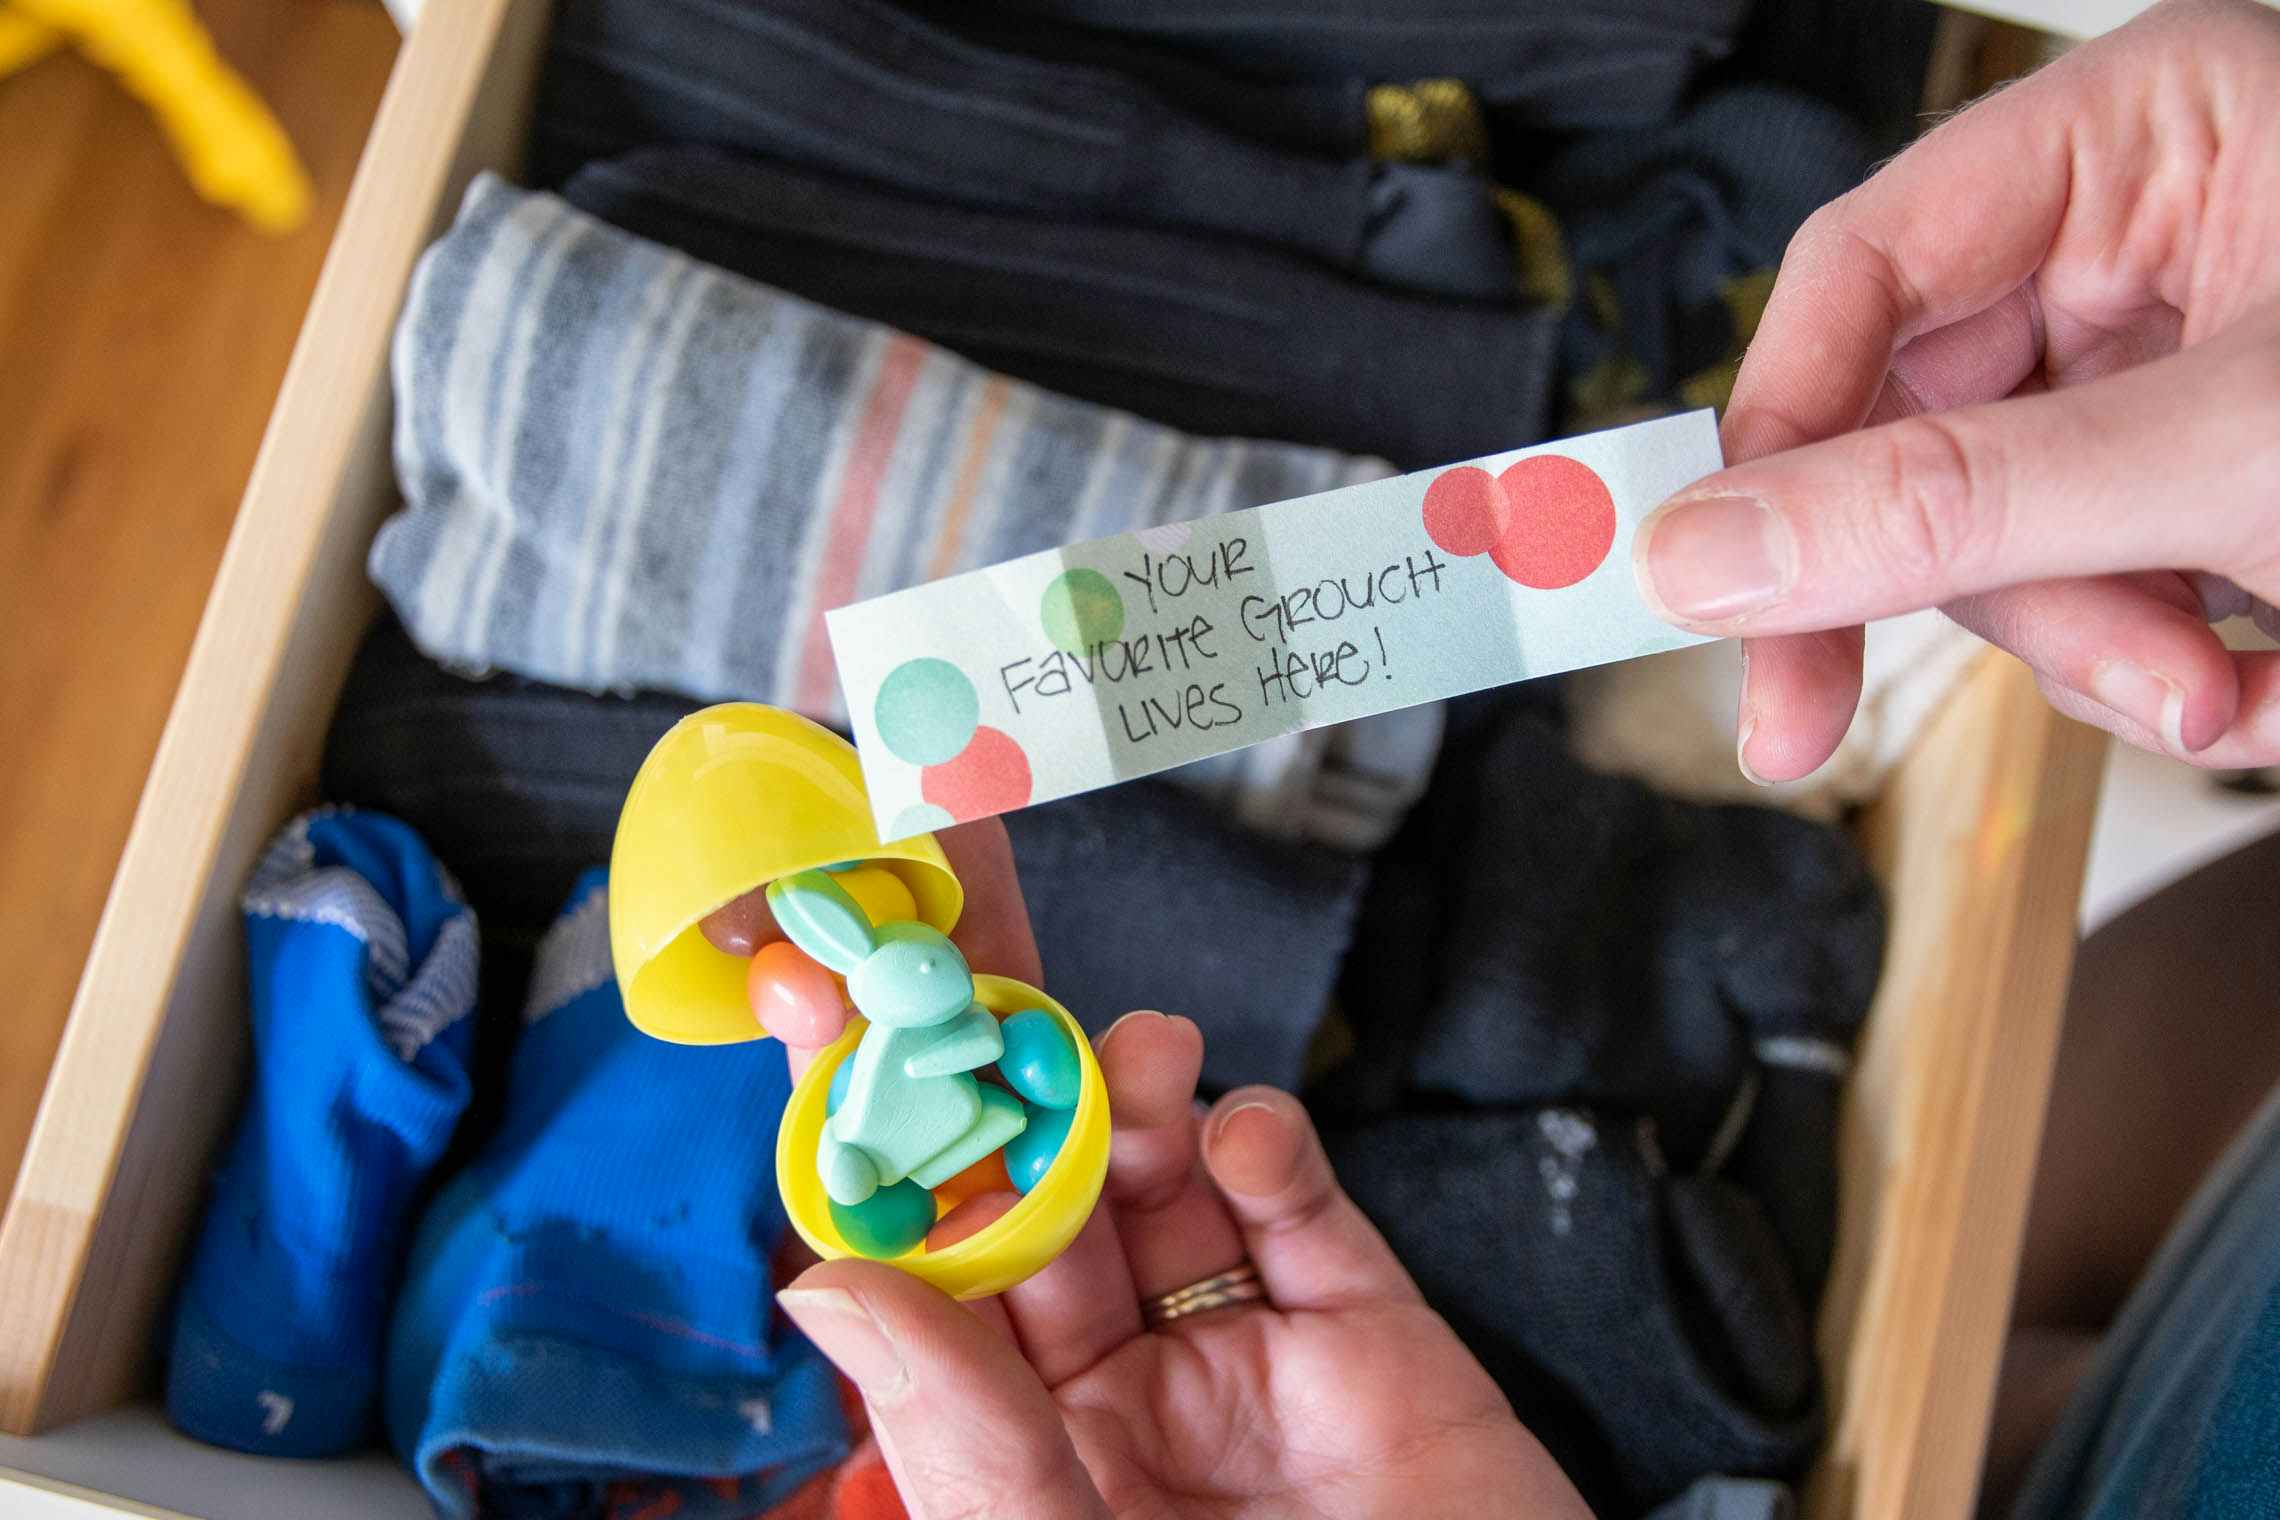 An plastic Easter egg held over a drawer filled with socks with a scavenger hunt clue in hand.